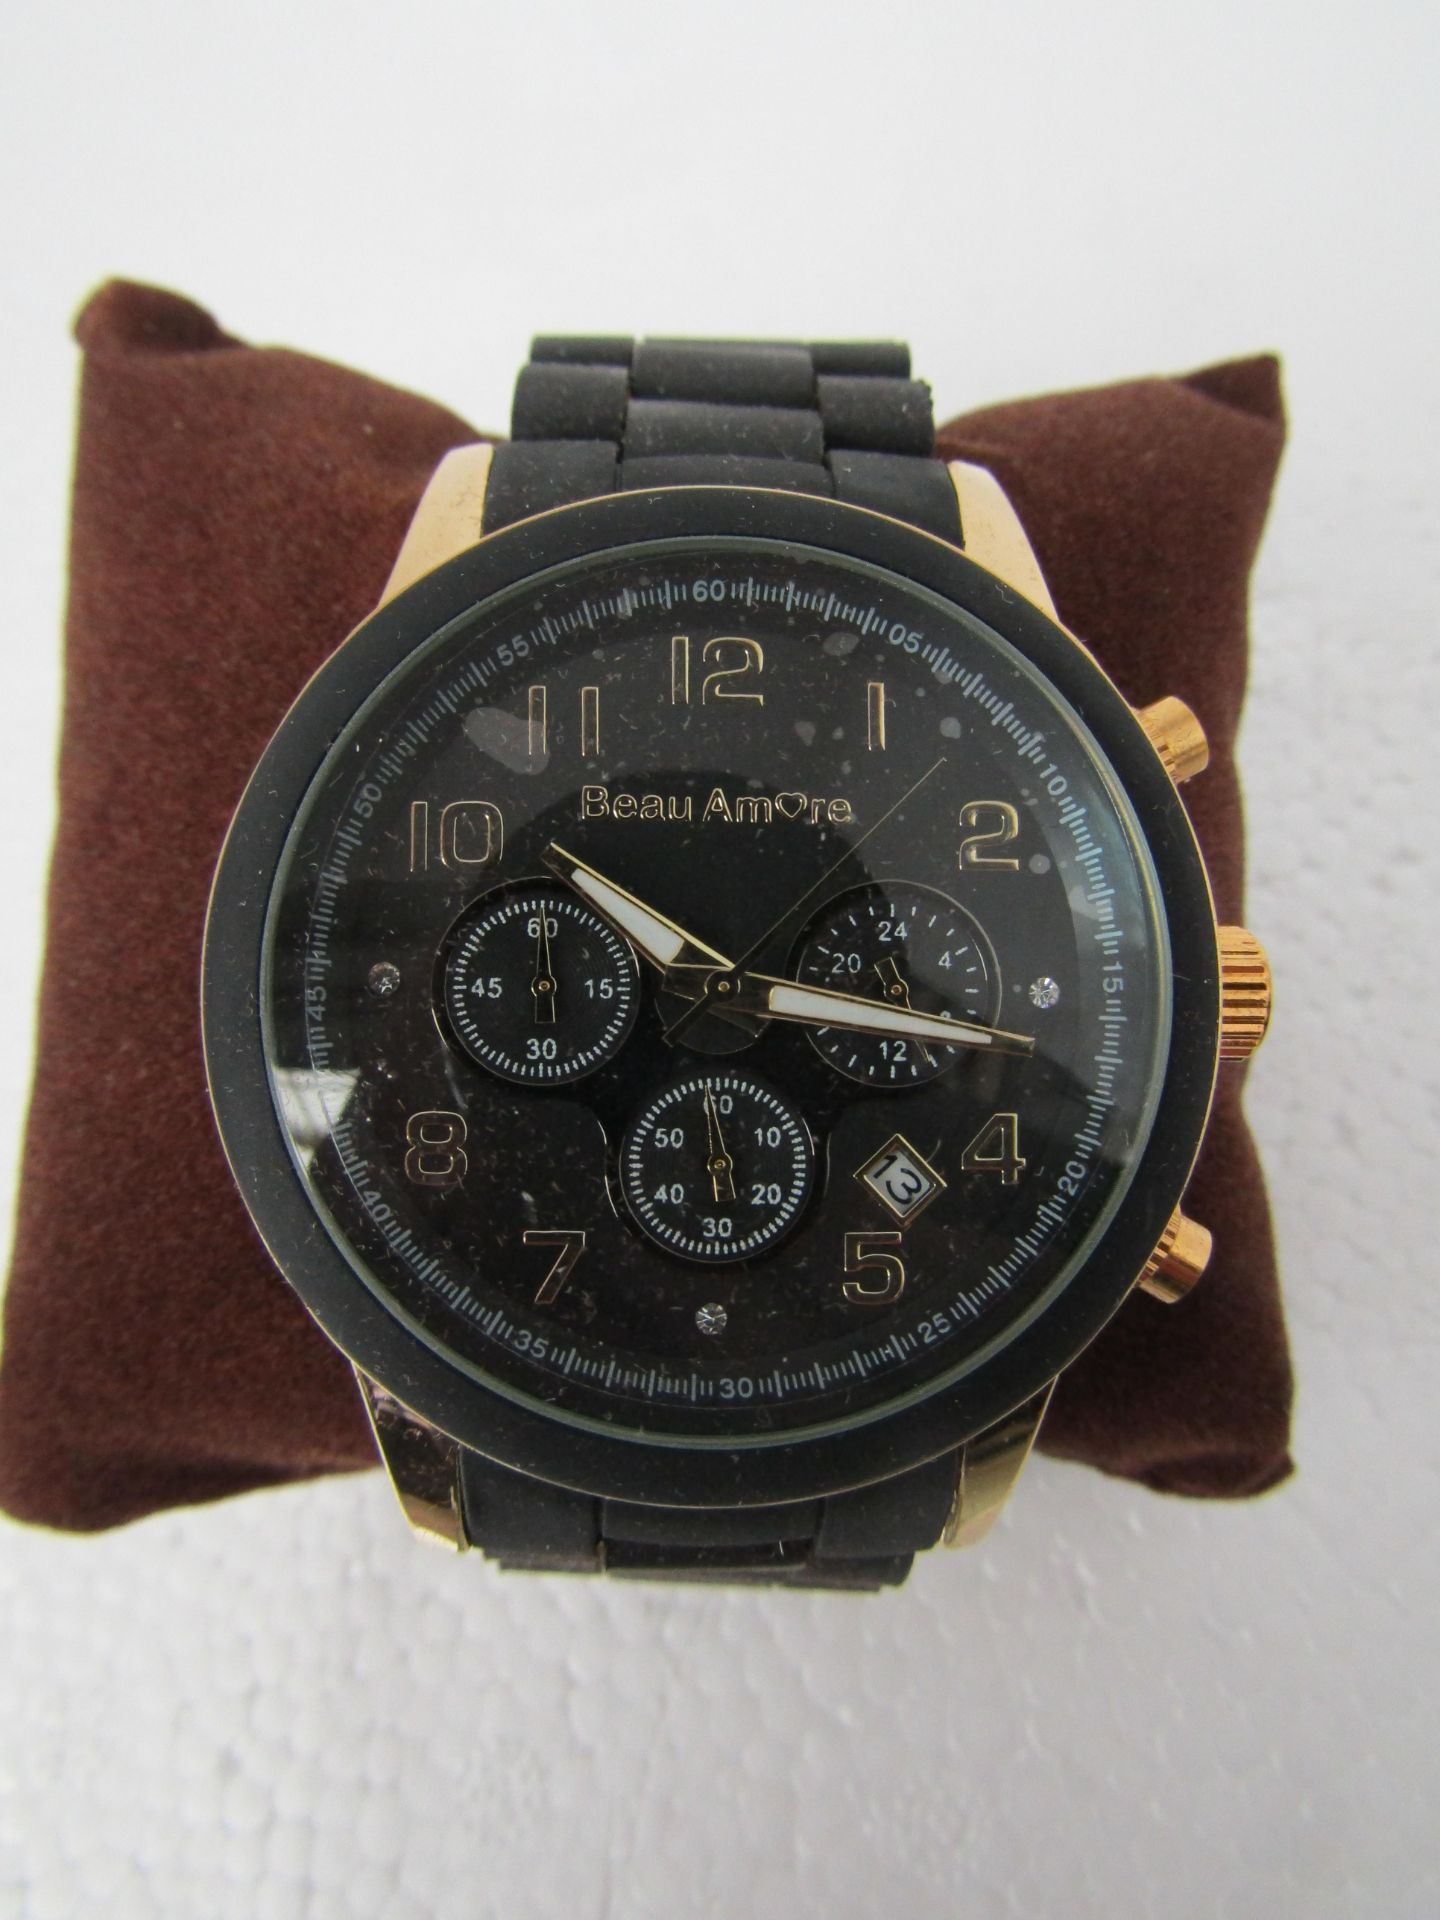 NO VAT! Beau Amore Black & Gold coloured watch new in presentation box, (in the style of the Classic